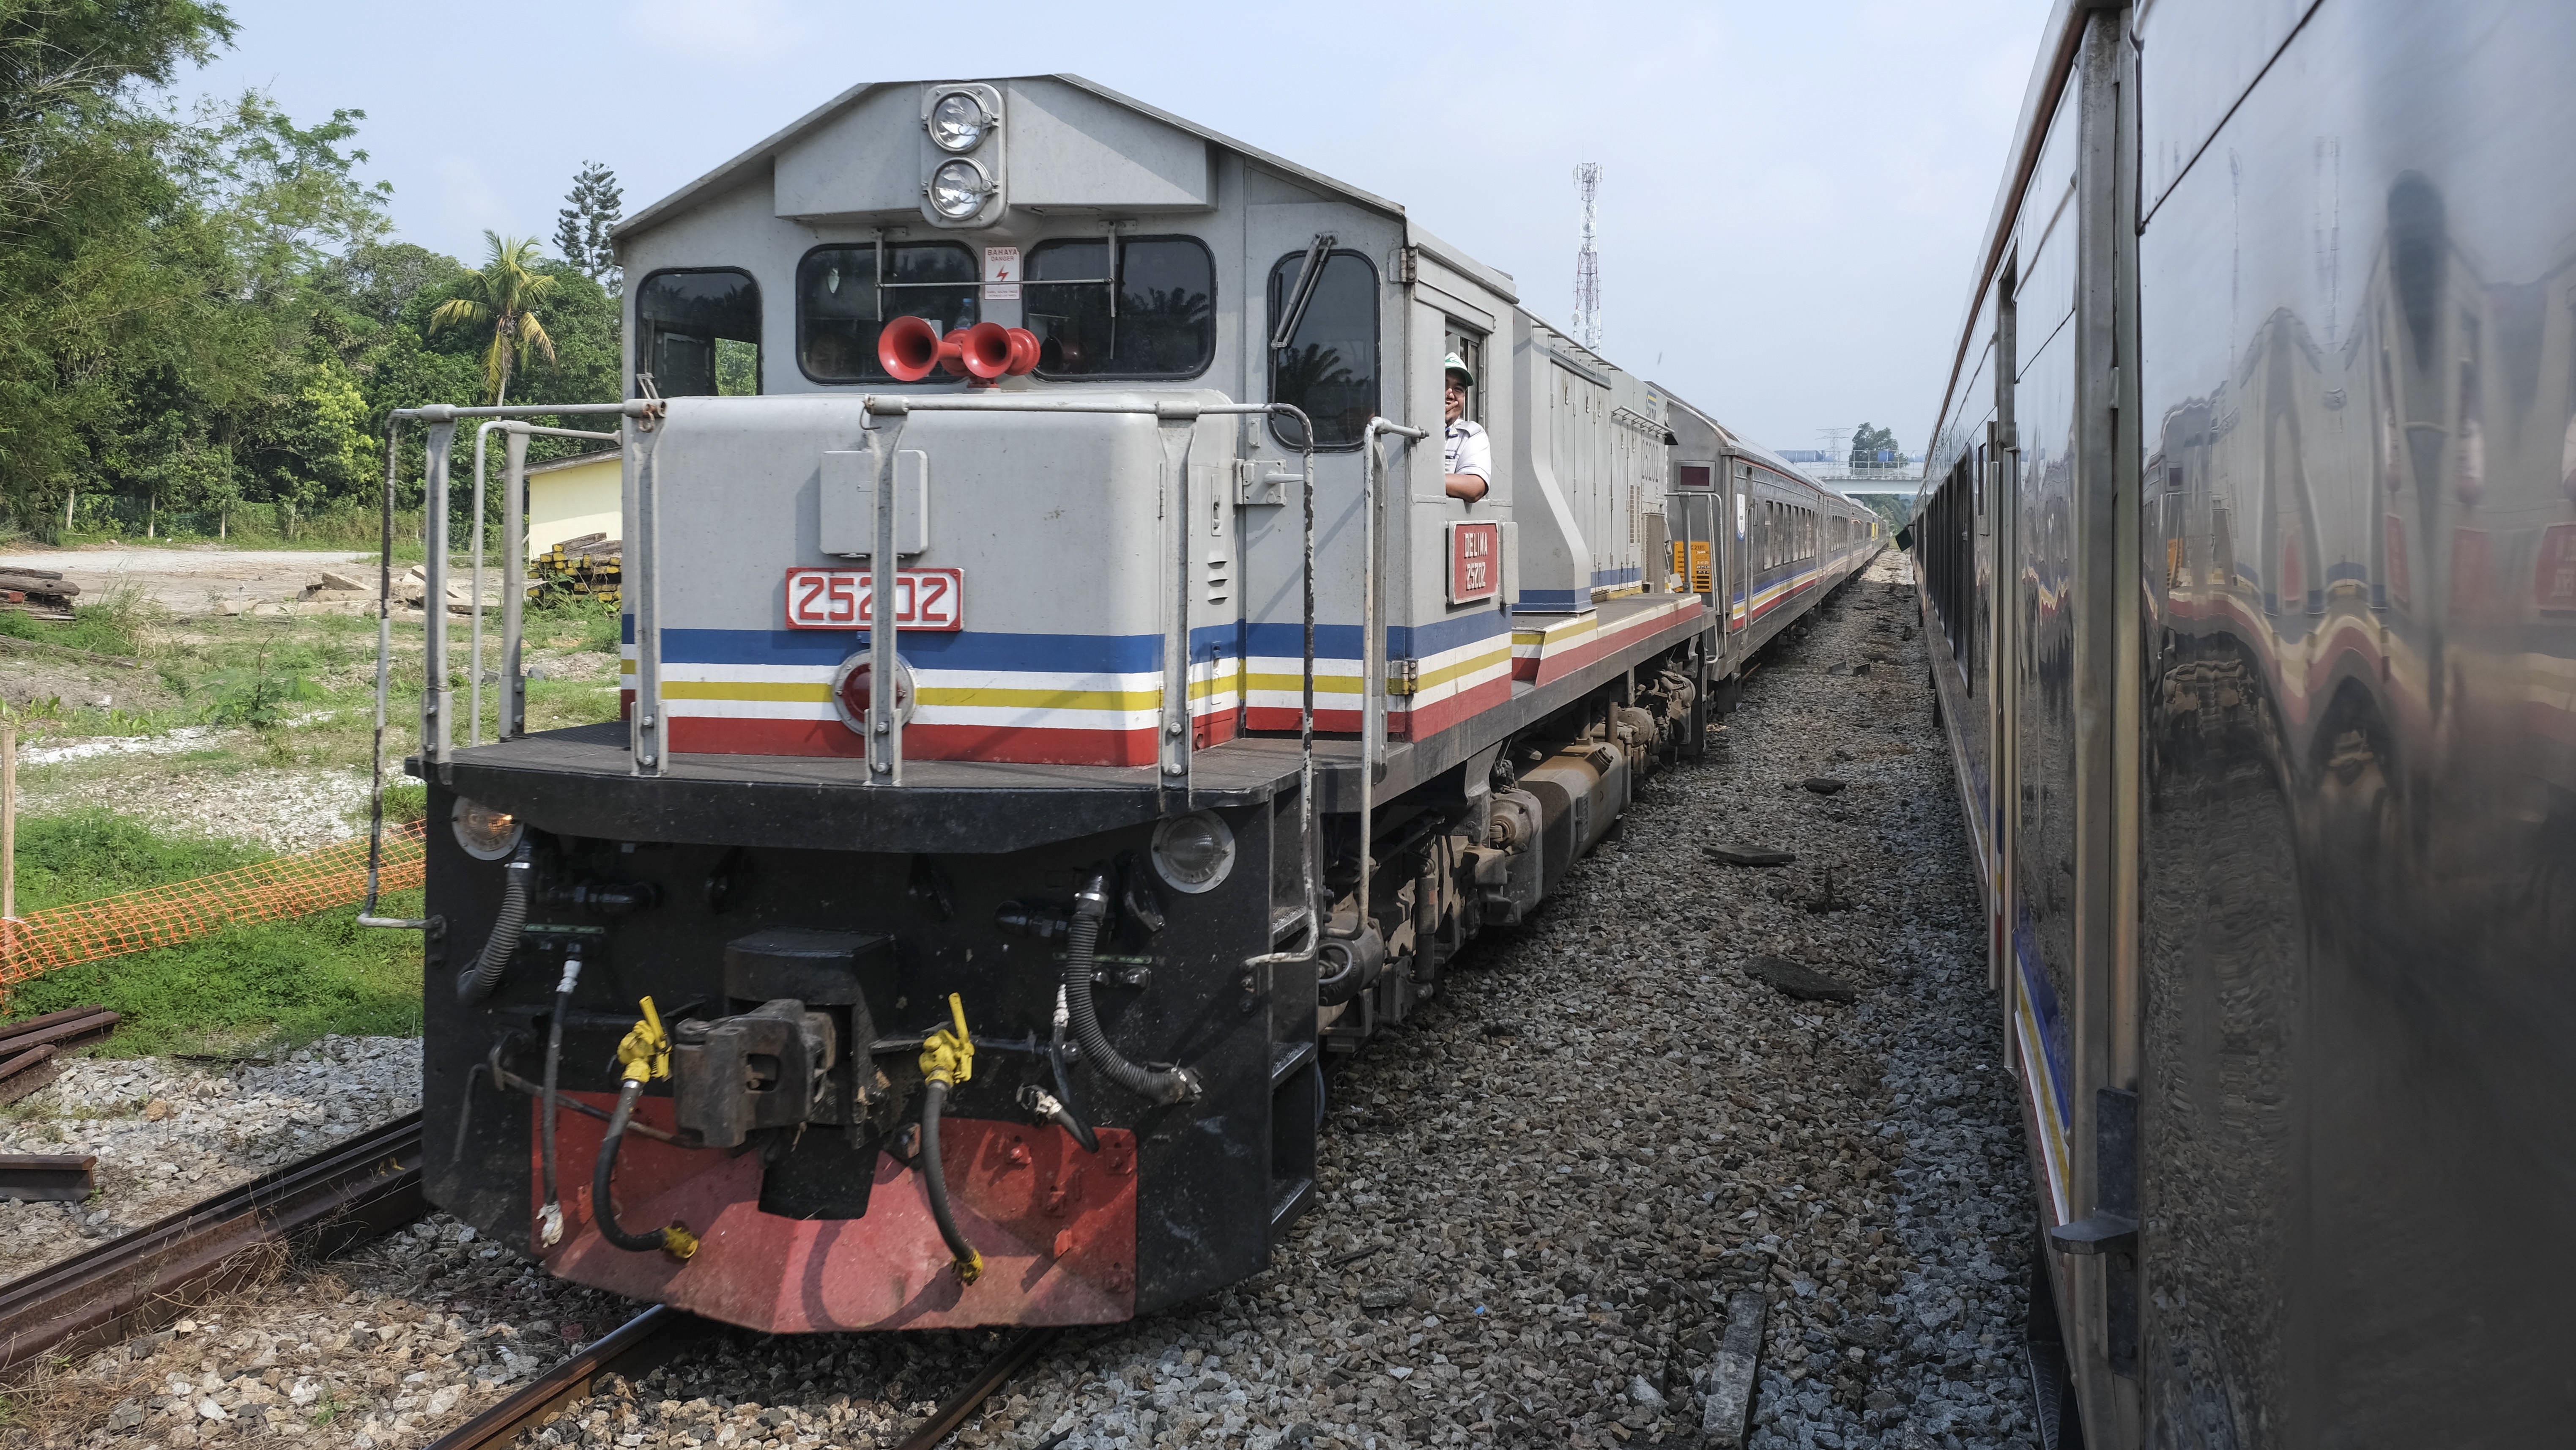 Take a slow train ride through southern Malaysia. Photo: Peter Ford